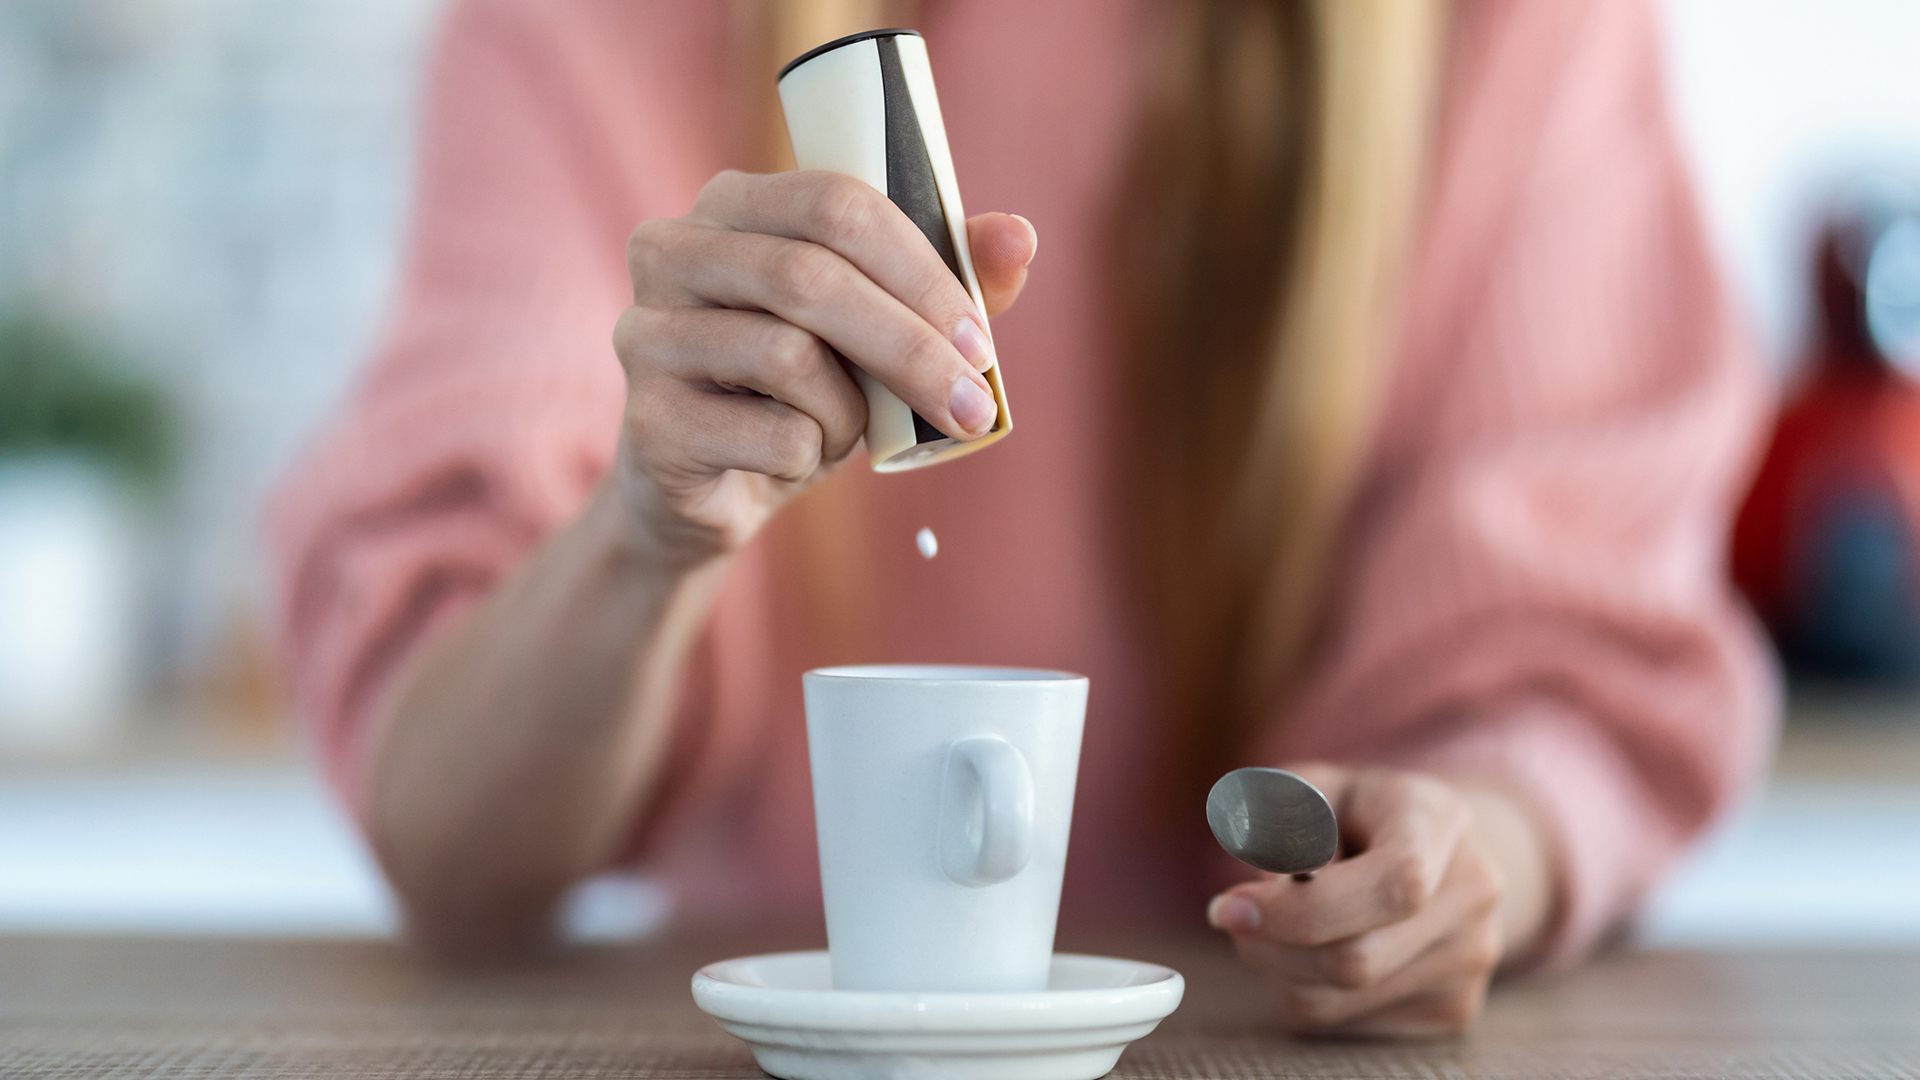 Artificial sweetener linked with increased risk of cancer- new study suggests